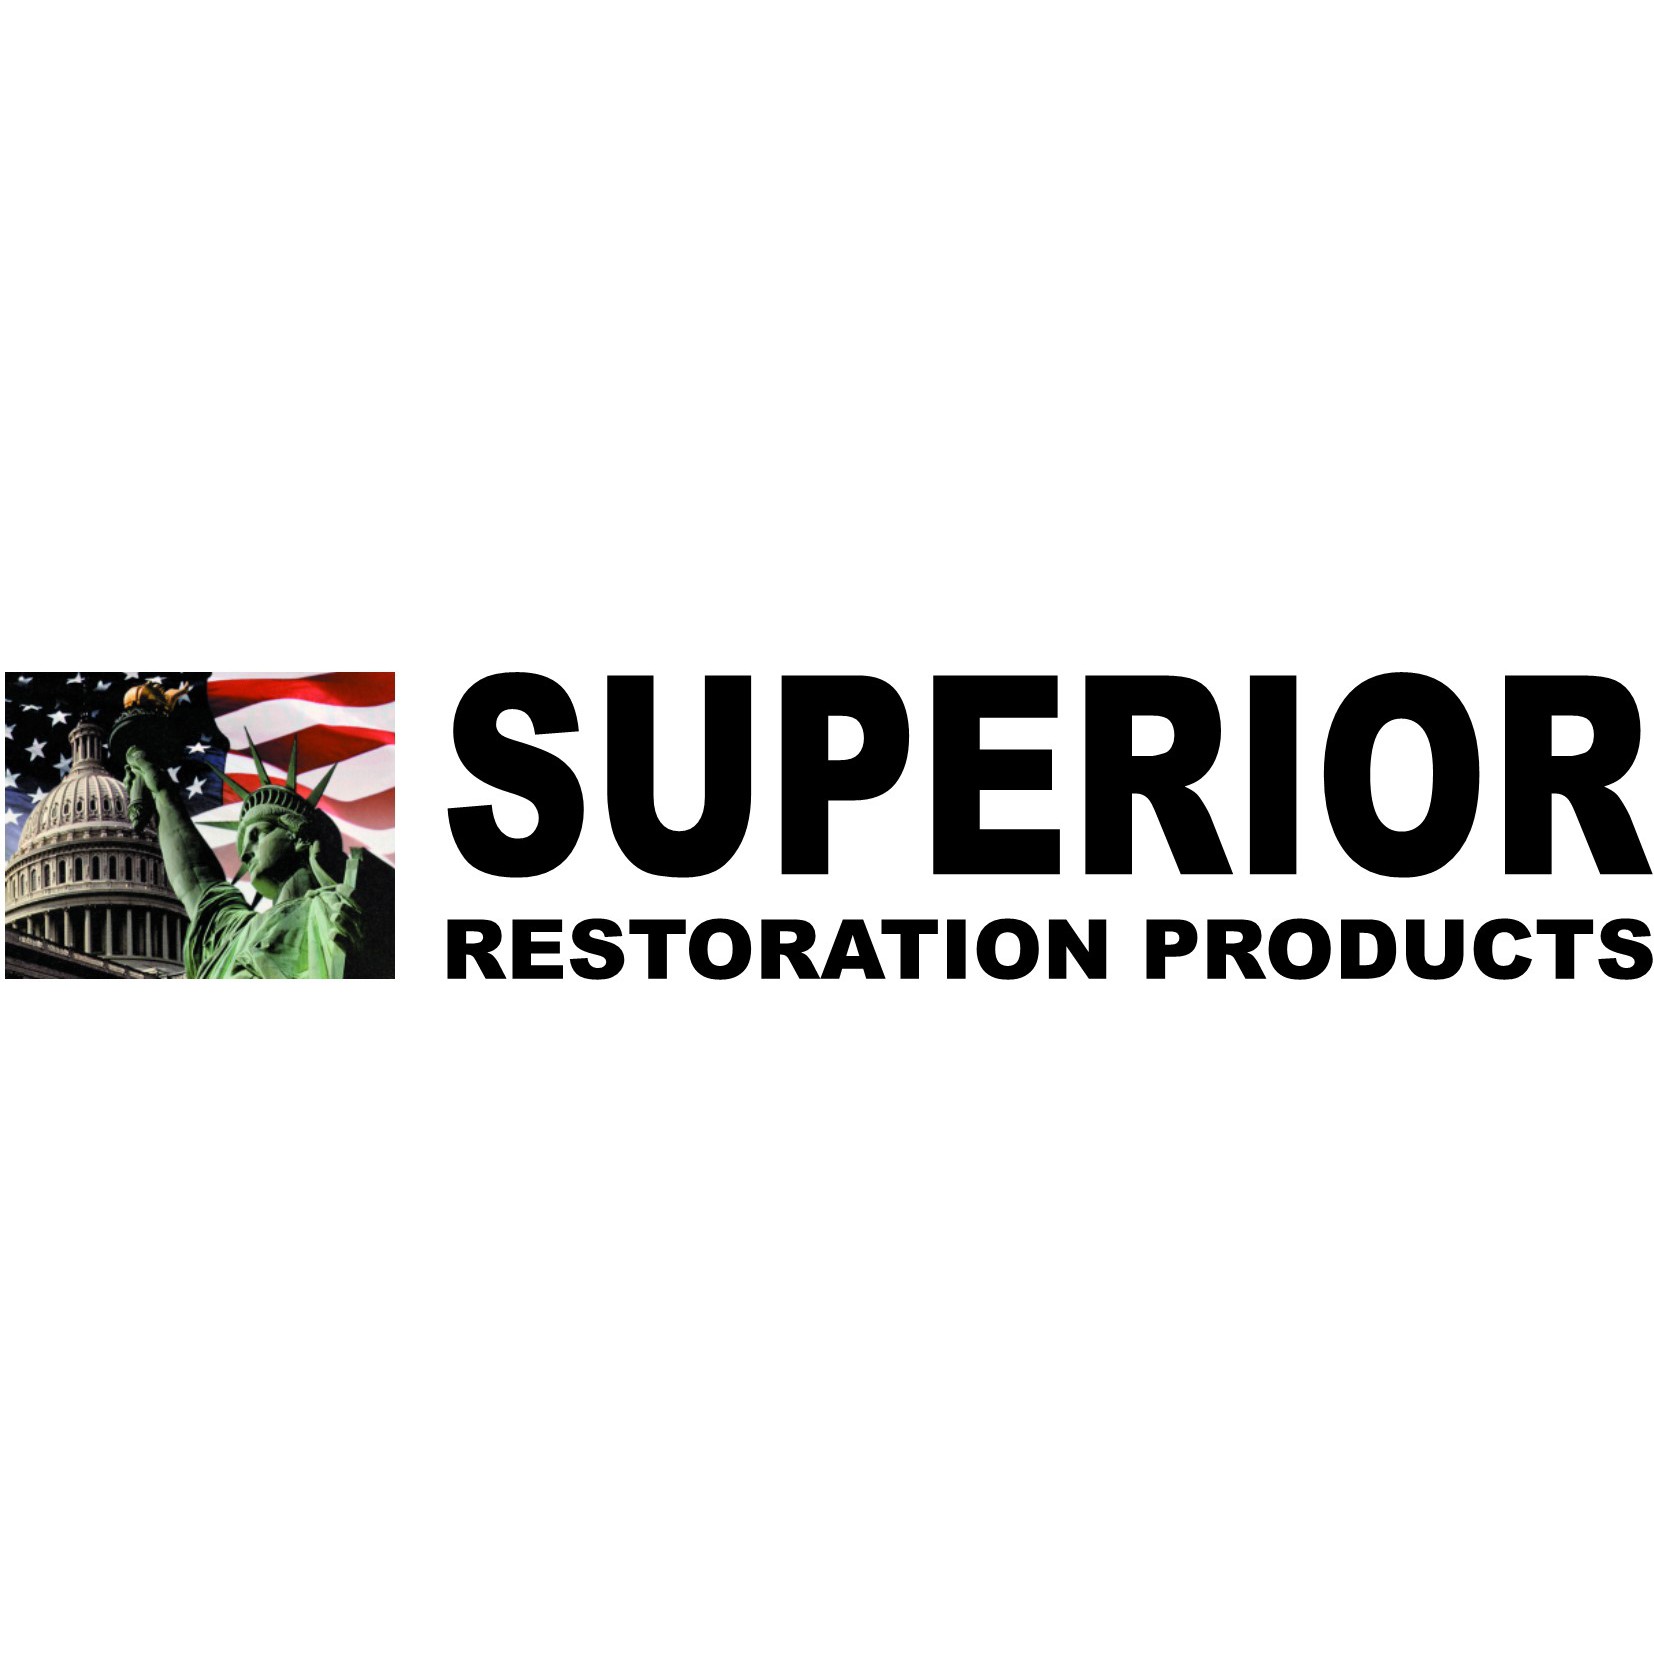 SUPERIOR RESTORATION PRODUCTS S.L. Granollers